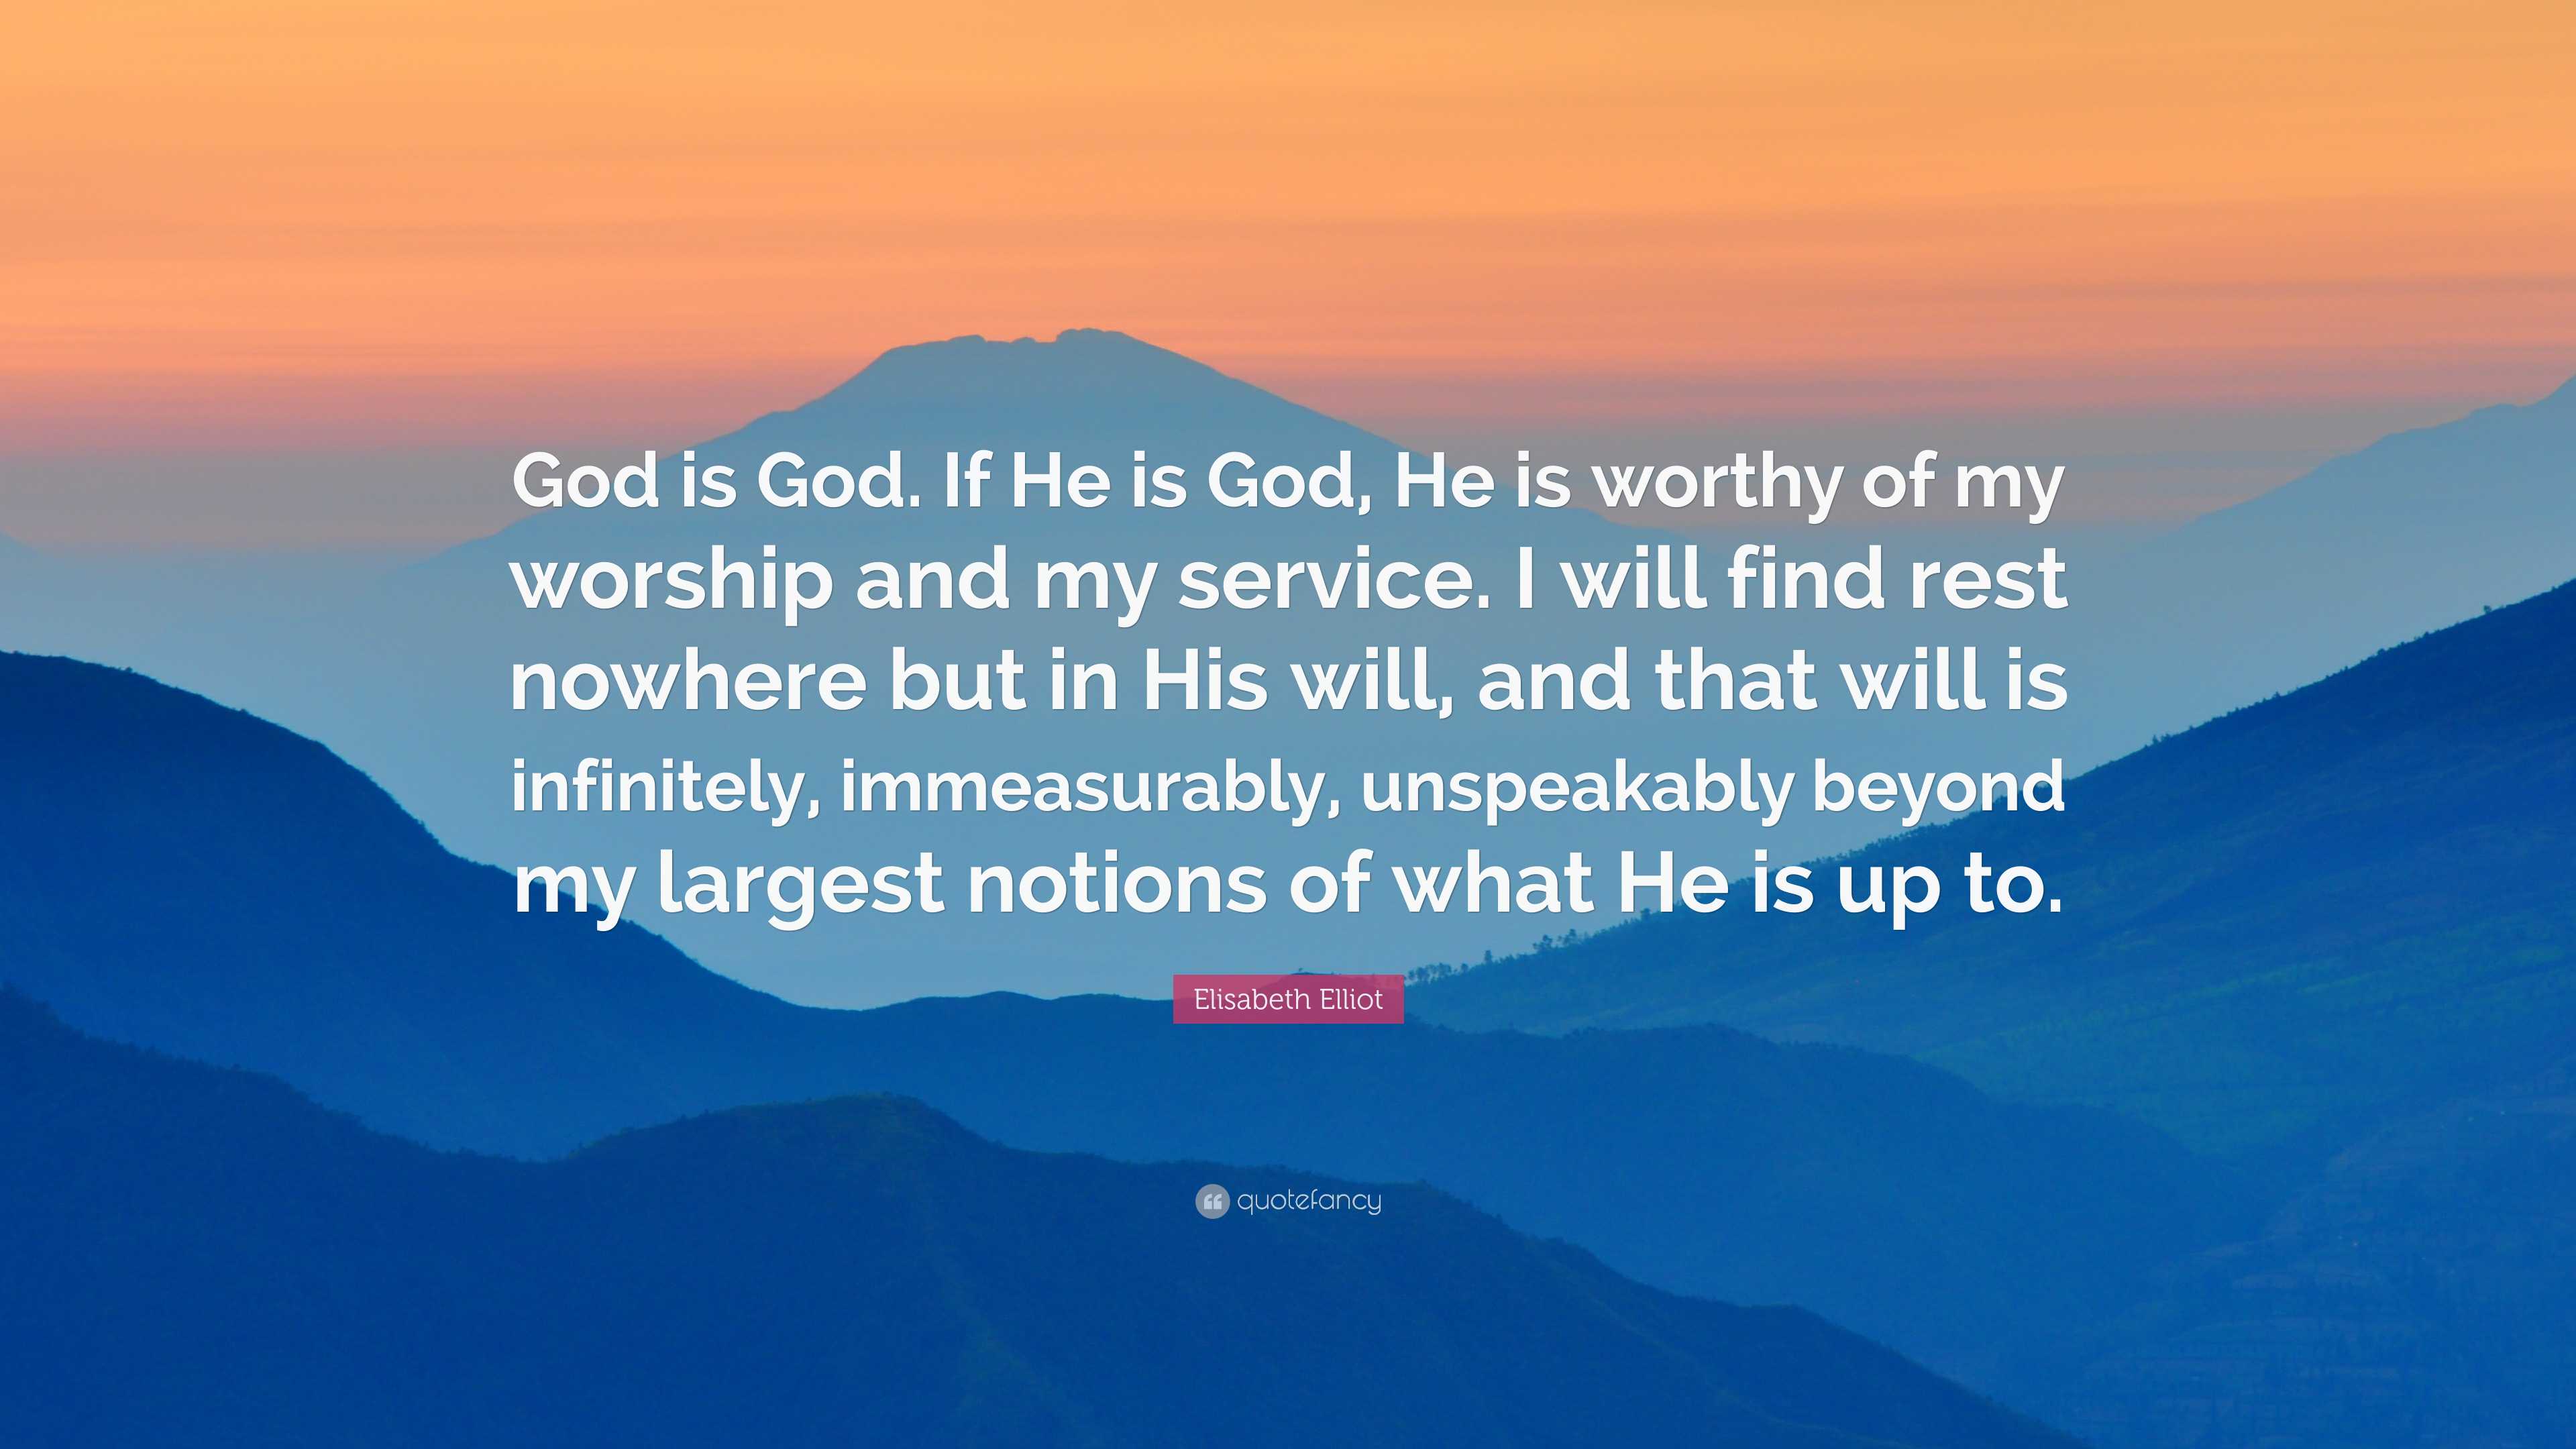 Elisabeth Elliot Quote: “God is God. If He is God, He is worthy of my  worship and my service. I will find rest nowhere but in His will, and that  ...”